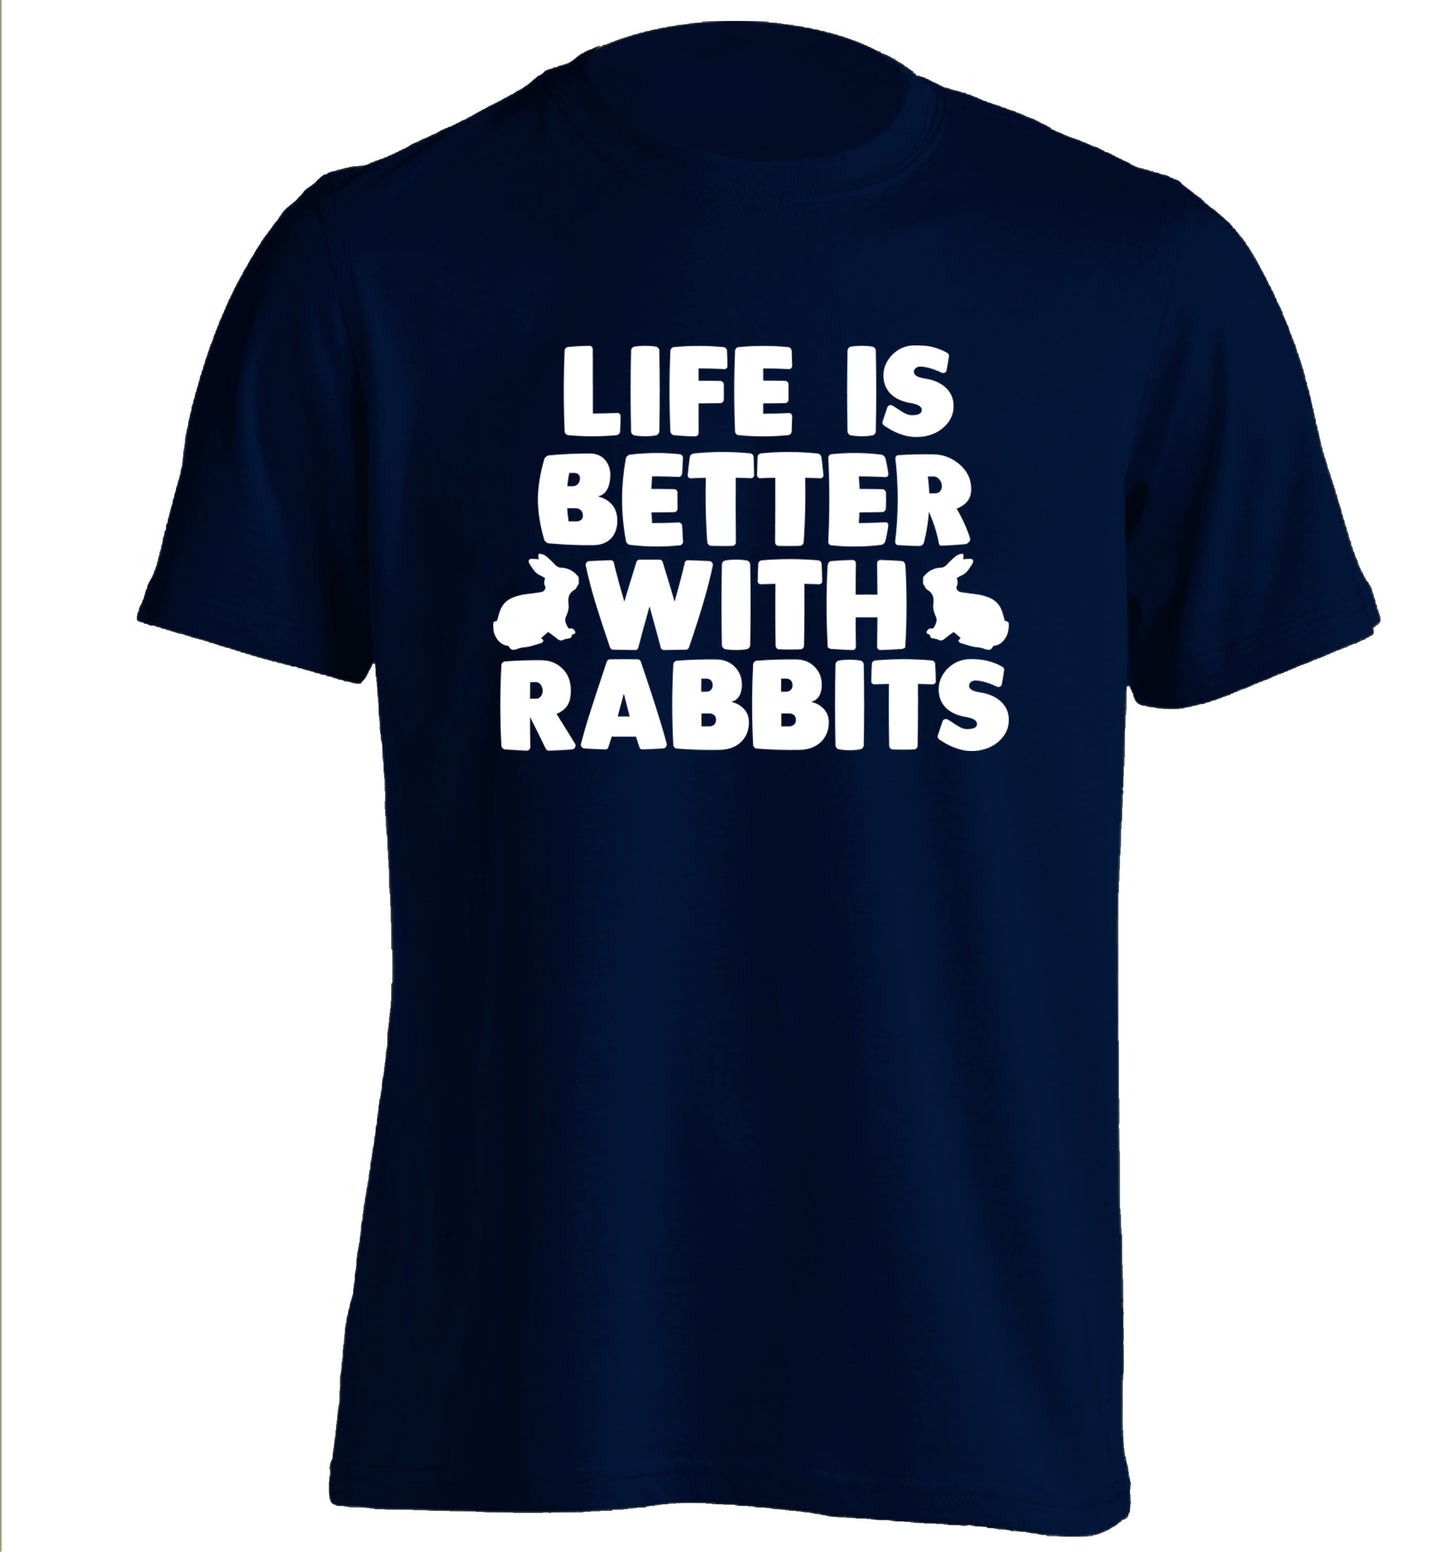 Life is better with rabbits adults unisex navy Tshirt 2XL